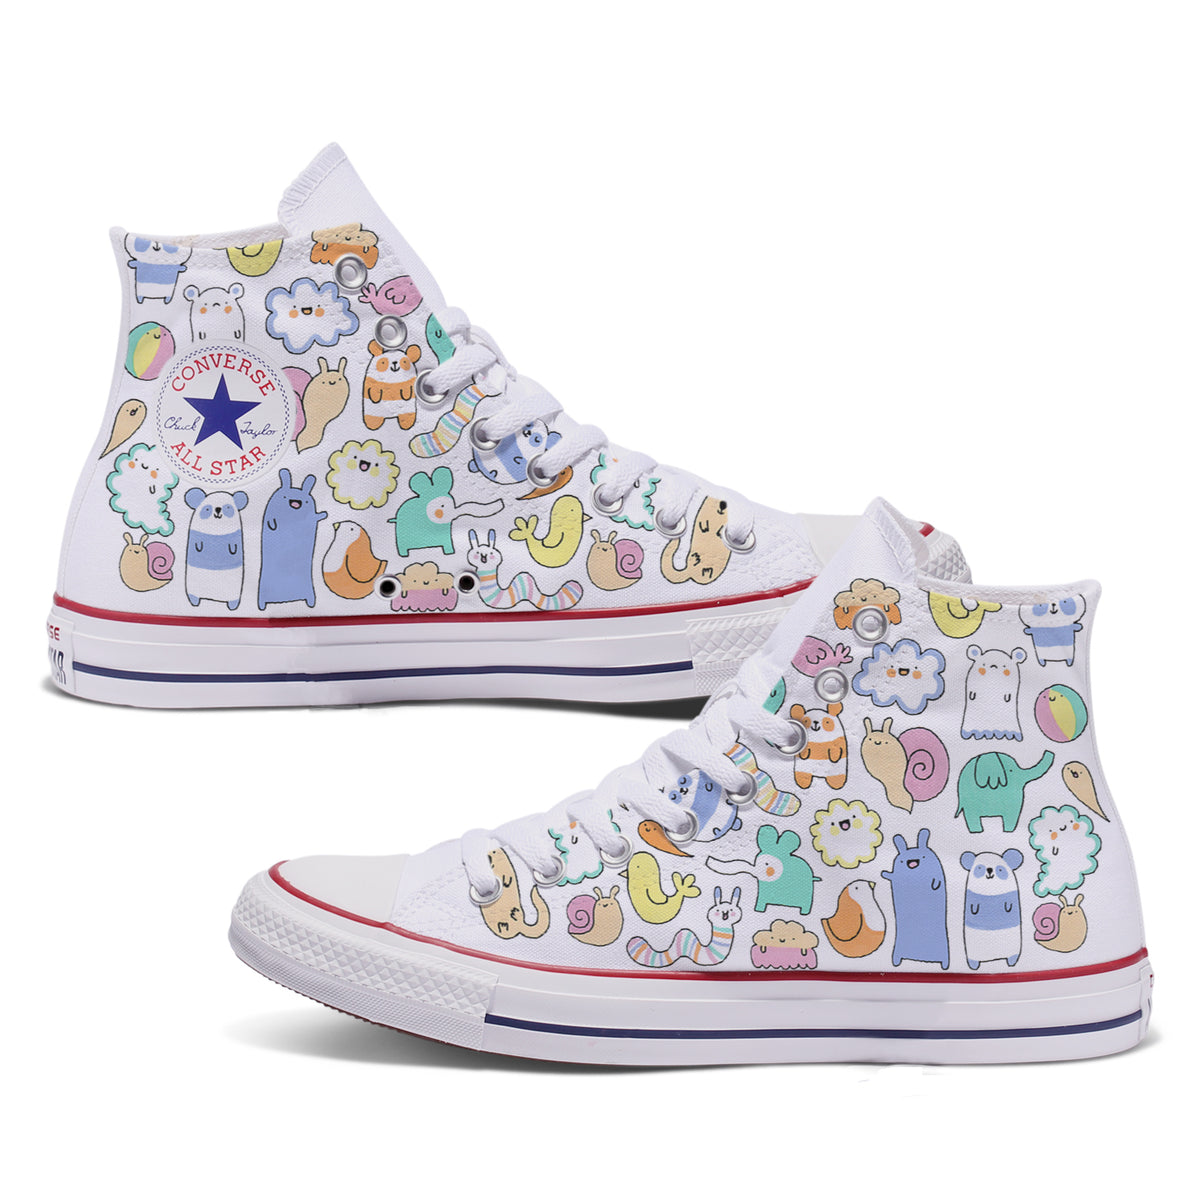 Higgly Squiggly Converse